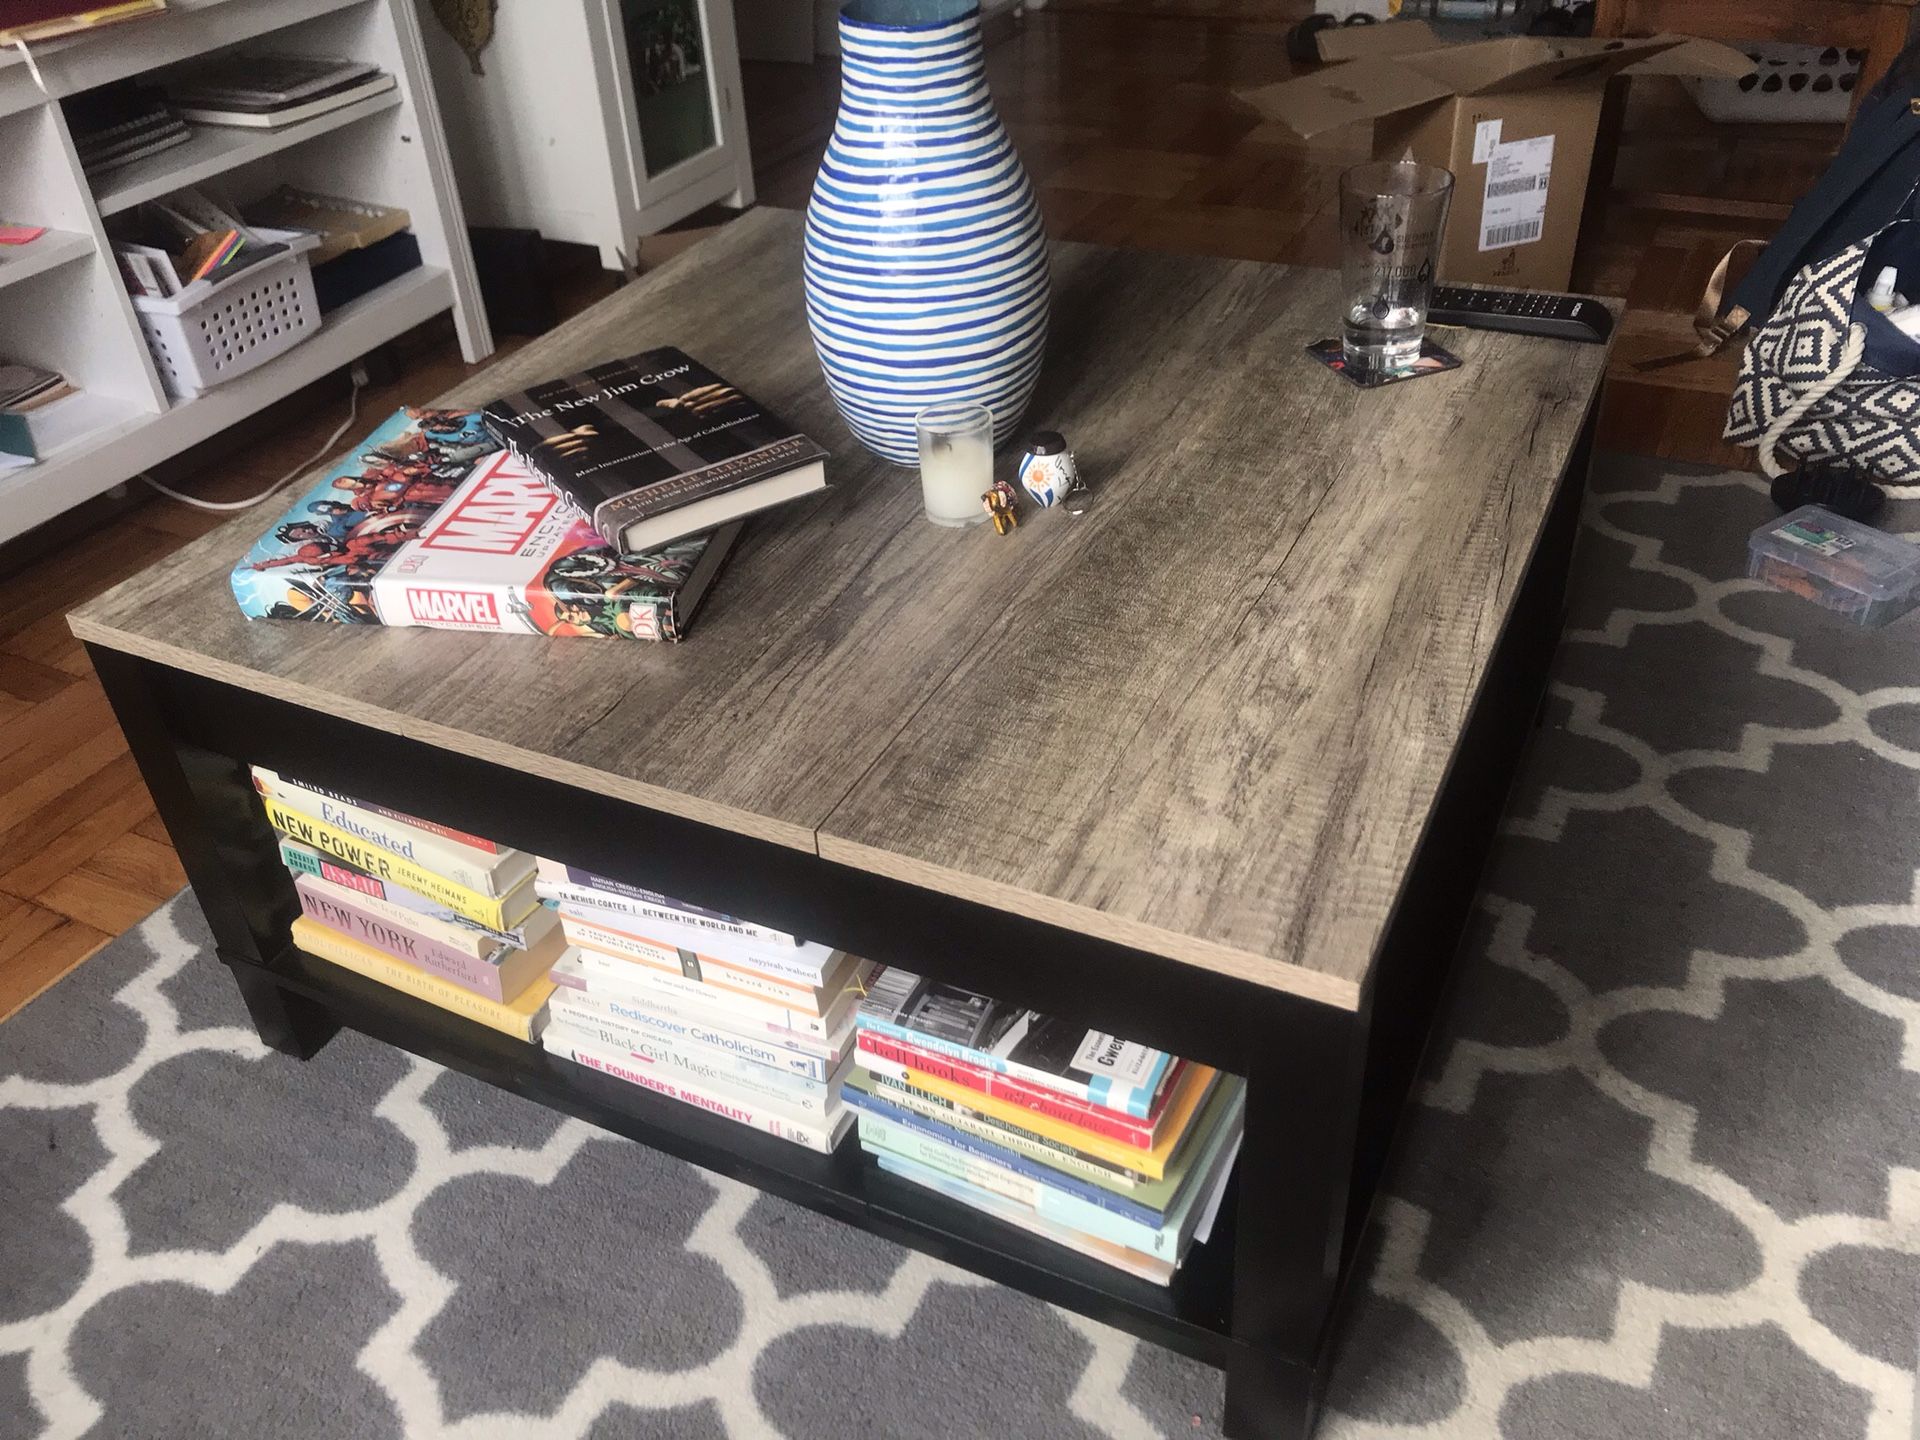 Square Coffee Table